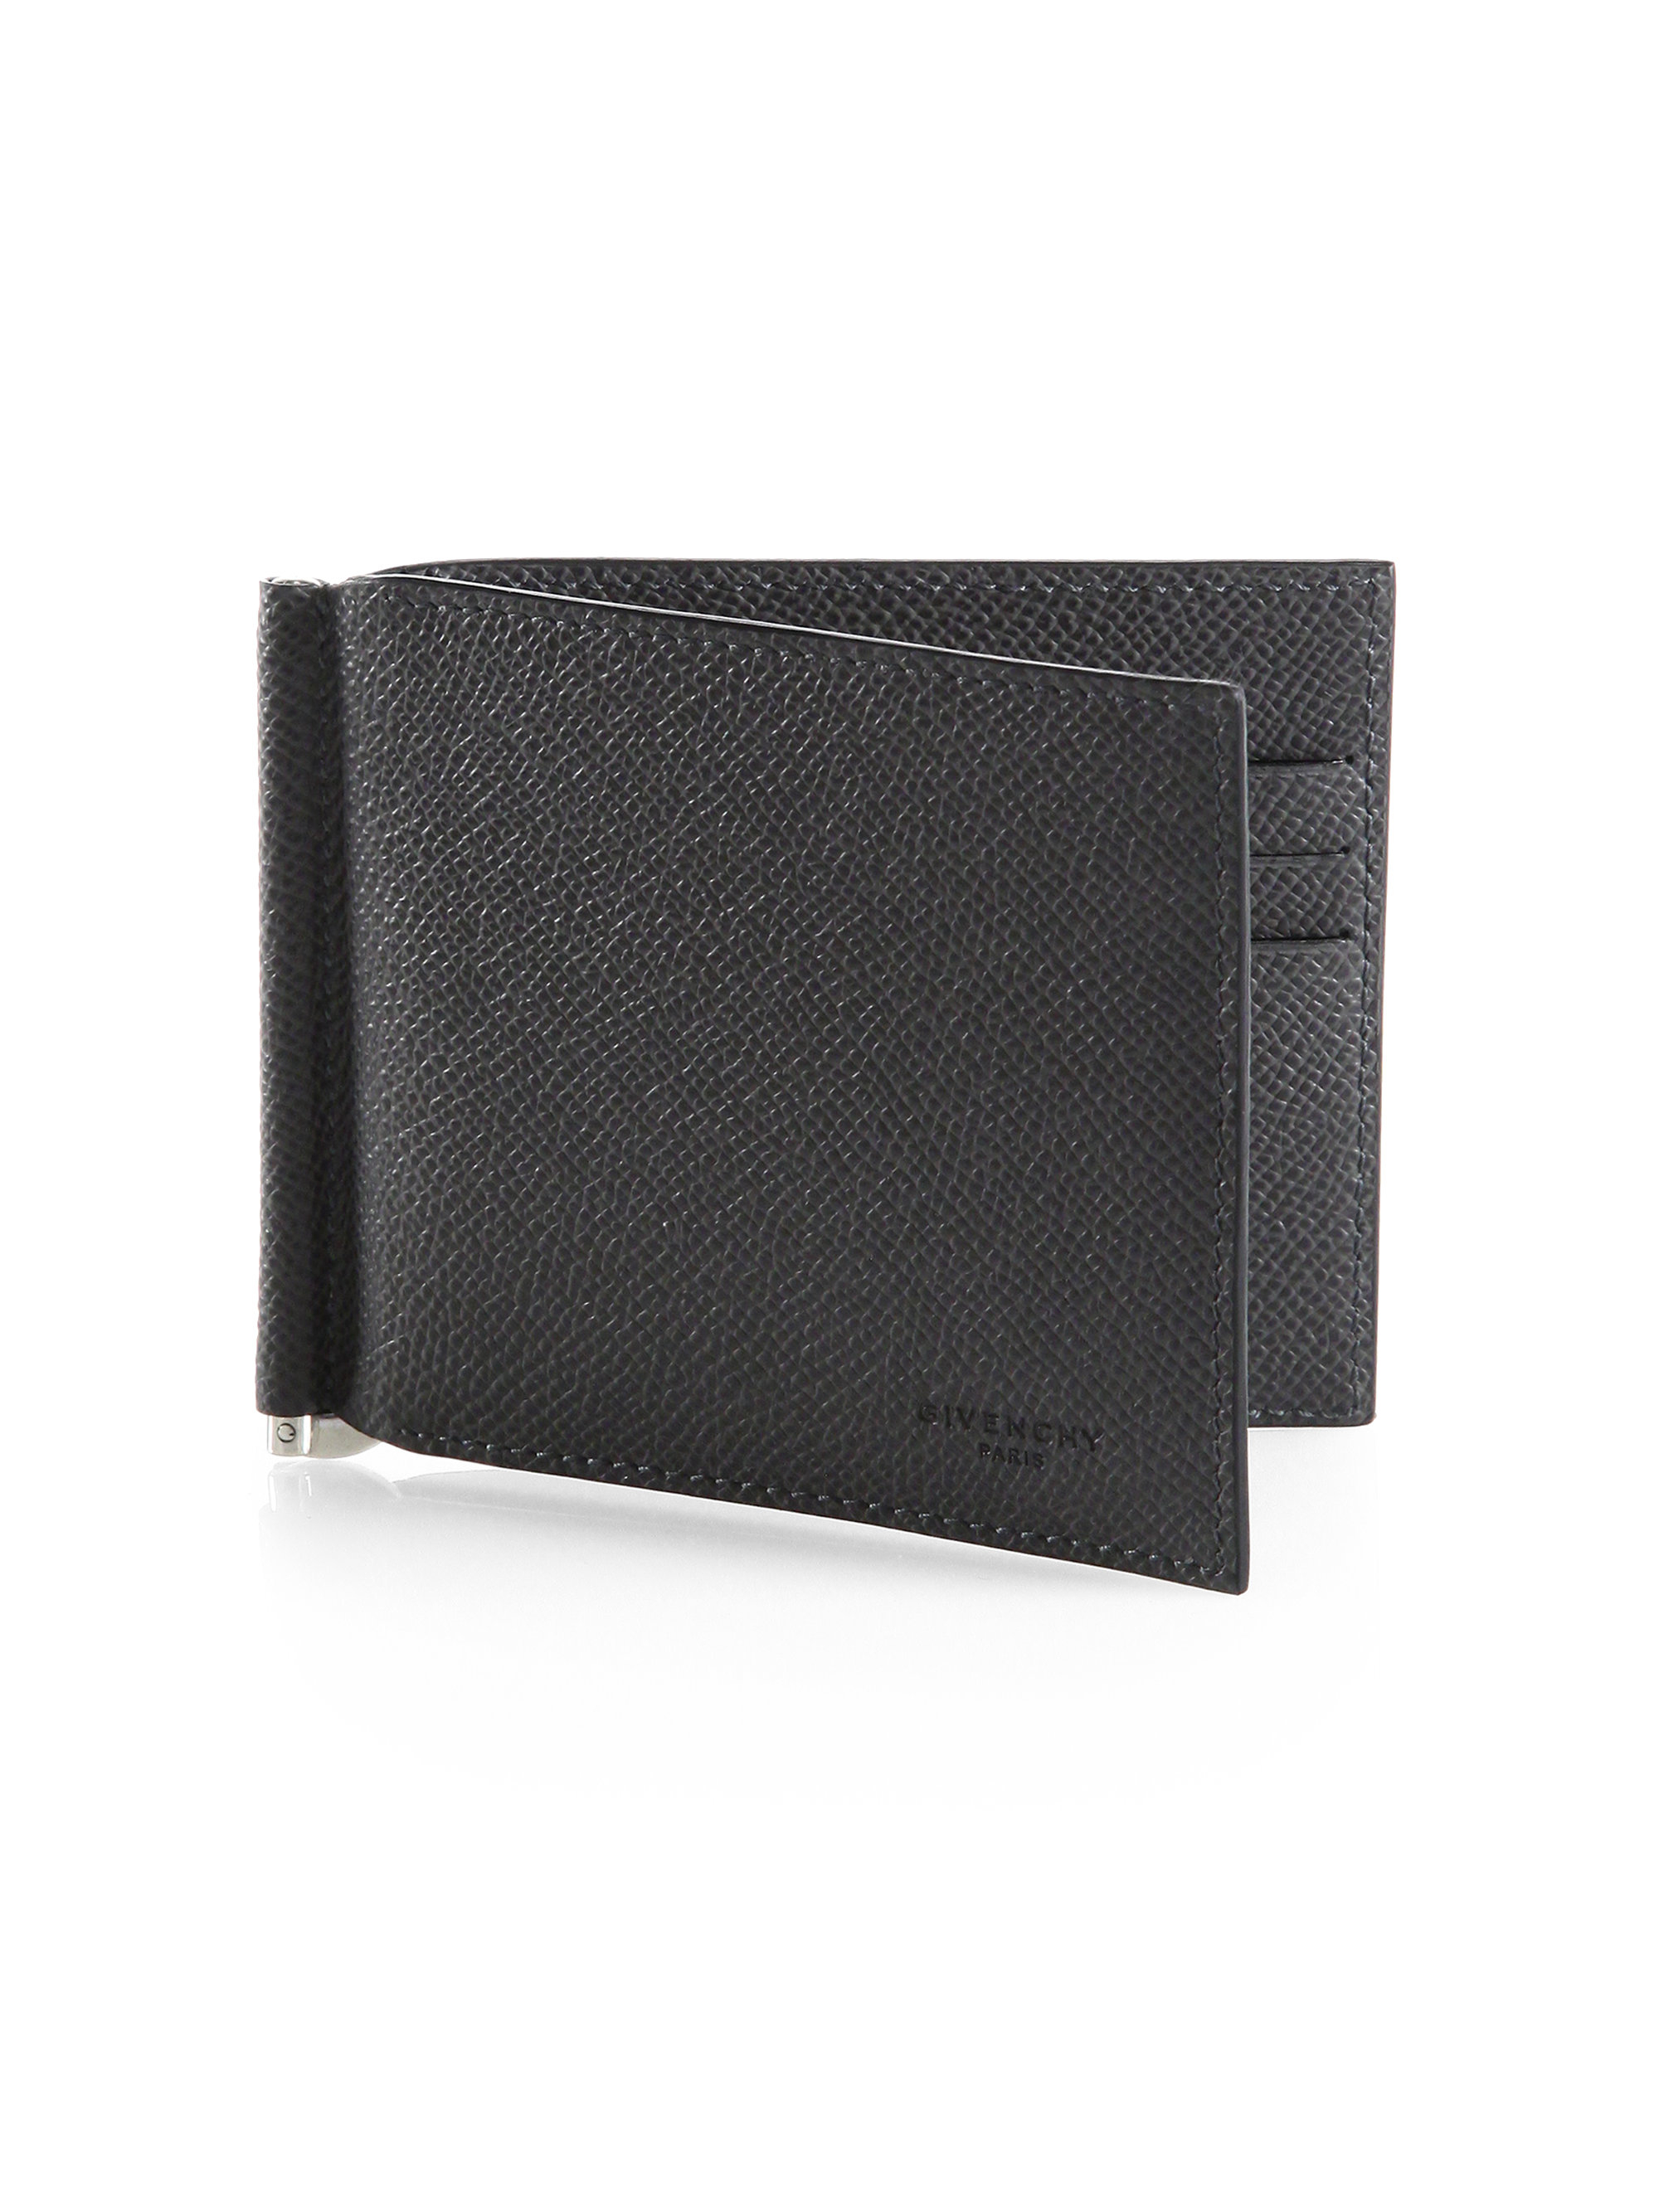 Givenchy Leather Money Clip Wallet in Gray for Men (DARK GREY) | Lyst